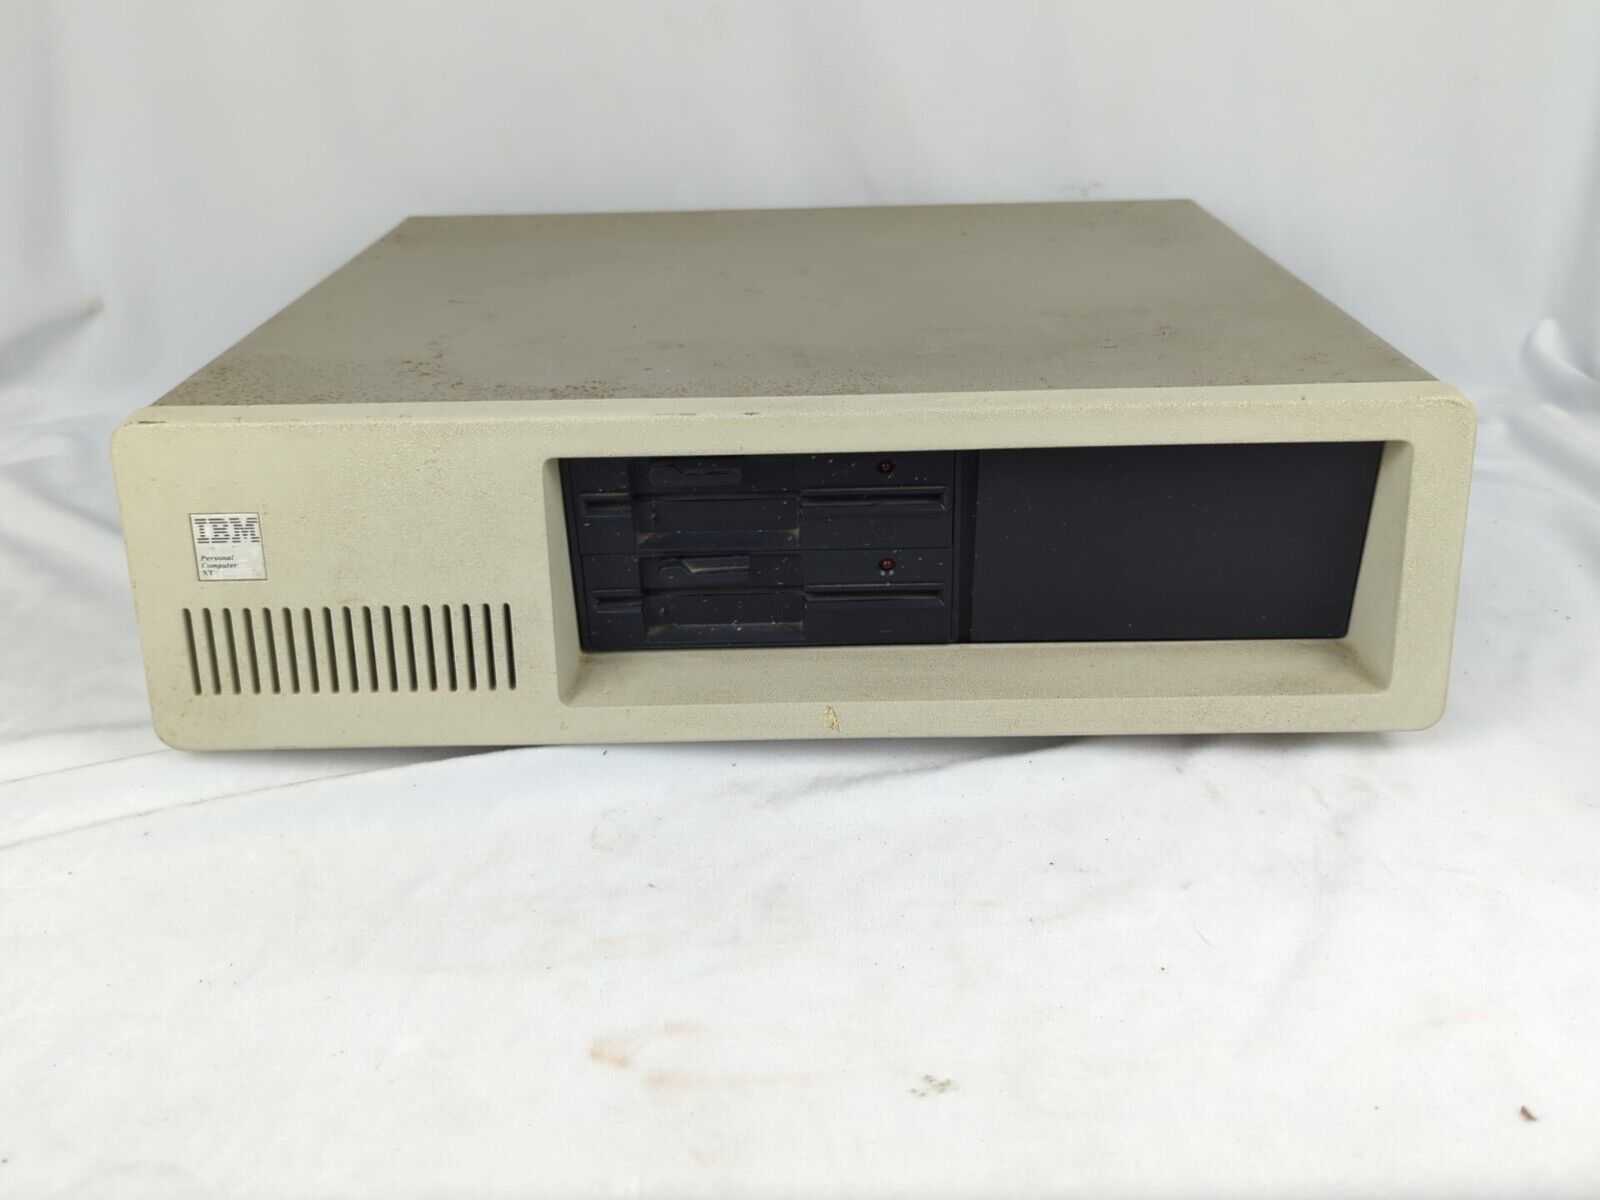 IBM 5160 Vintage Personal Computer XT Powers On